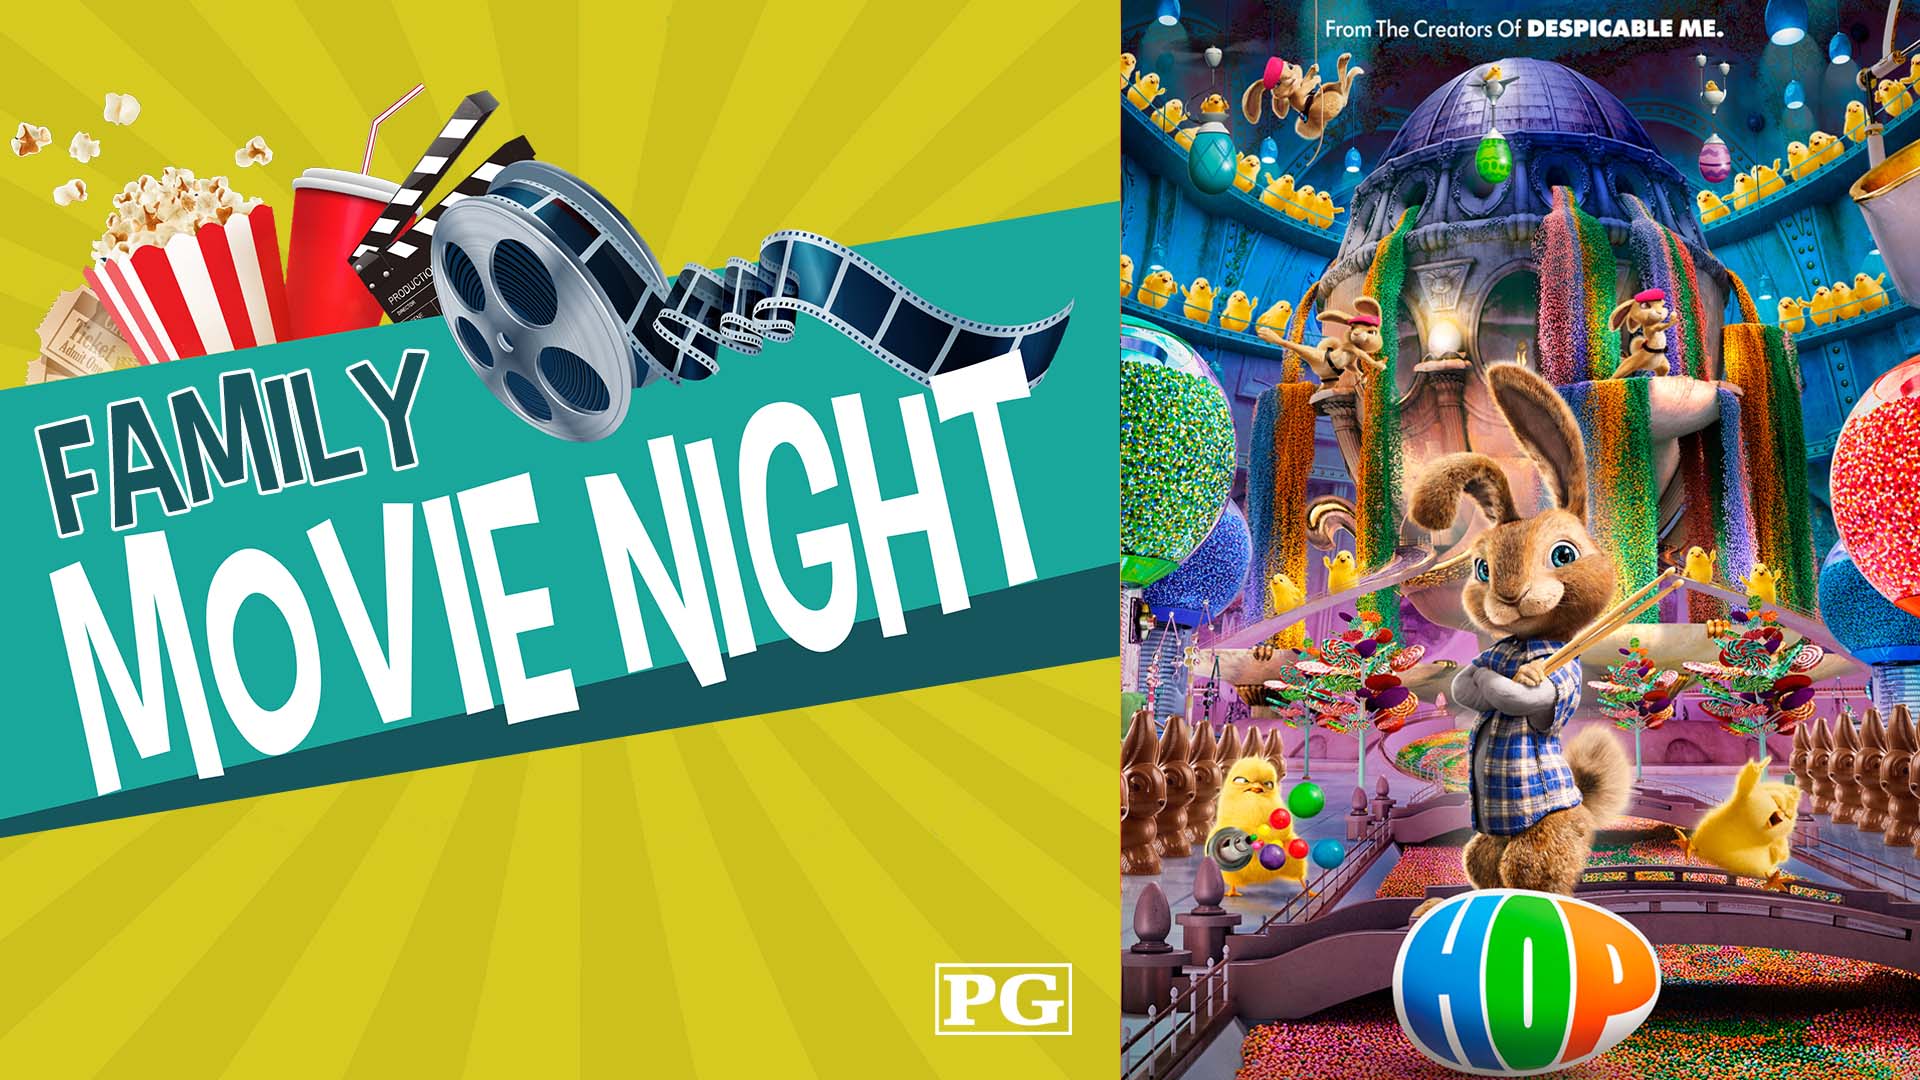 Image reads "Family Movie Night" against a dark yellow sunburst background. A bucket of popcorn, a cup, and a movie reel are above the title. On the right side of the image, text reads "Hop" and an animated bunny stands with crossed arms and drumsticks while more bunnies and chicks perform in the background.